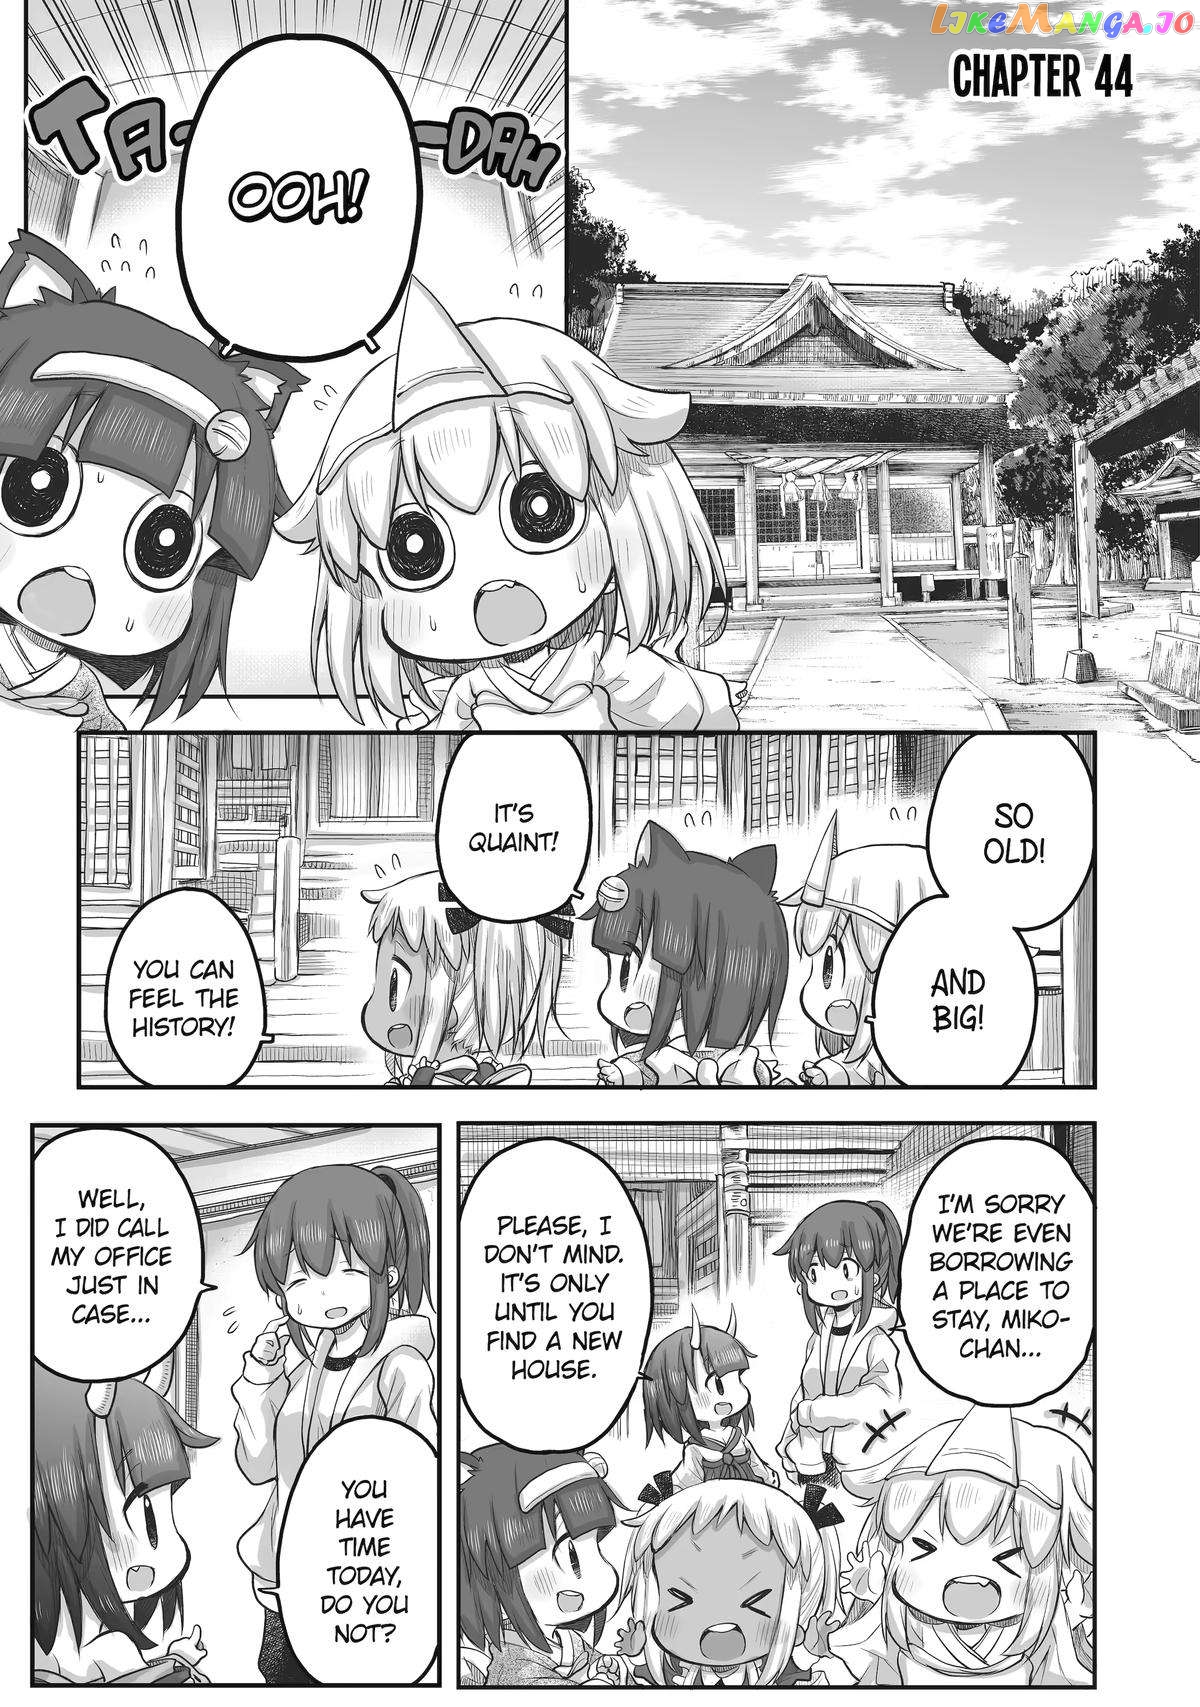 Ms. Corporate Slave Wants to be Healed by a Loli Spirit - chapter 44 - #1